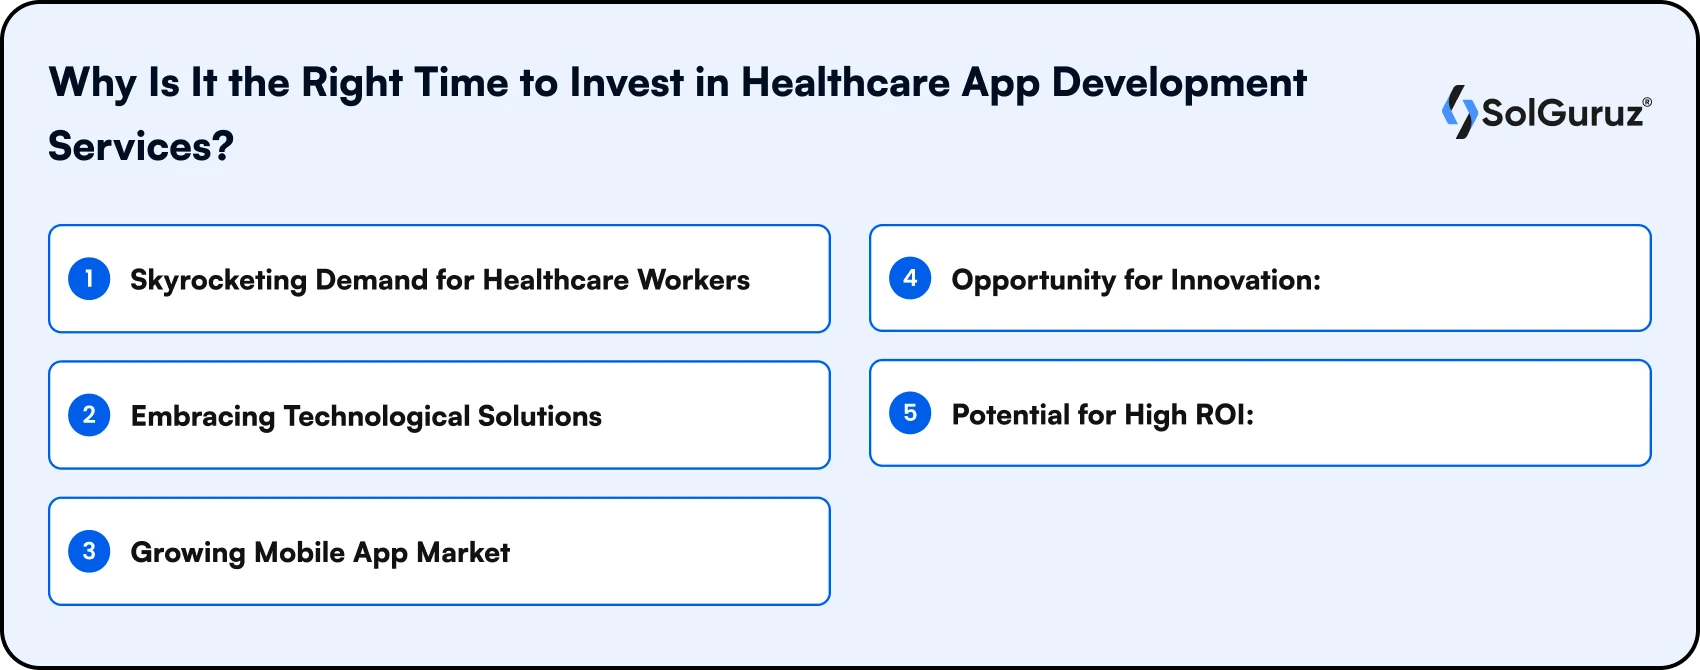 Why Is It the Right Time to Invest in Healthcare Staffing App Development Services